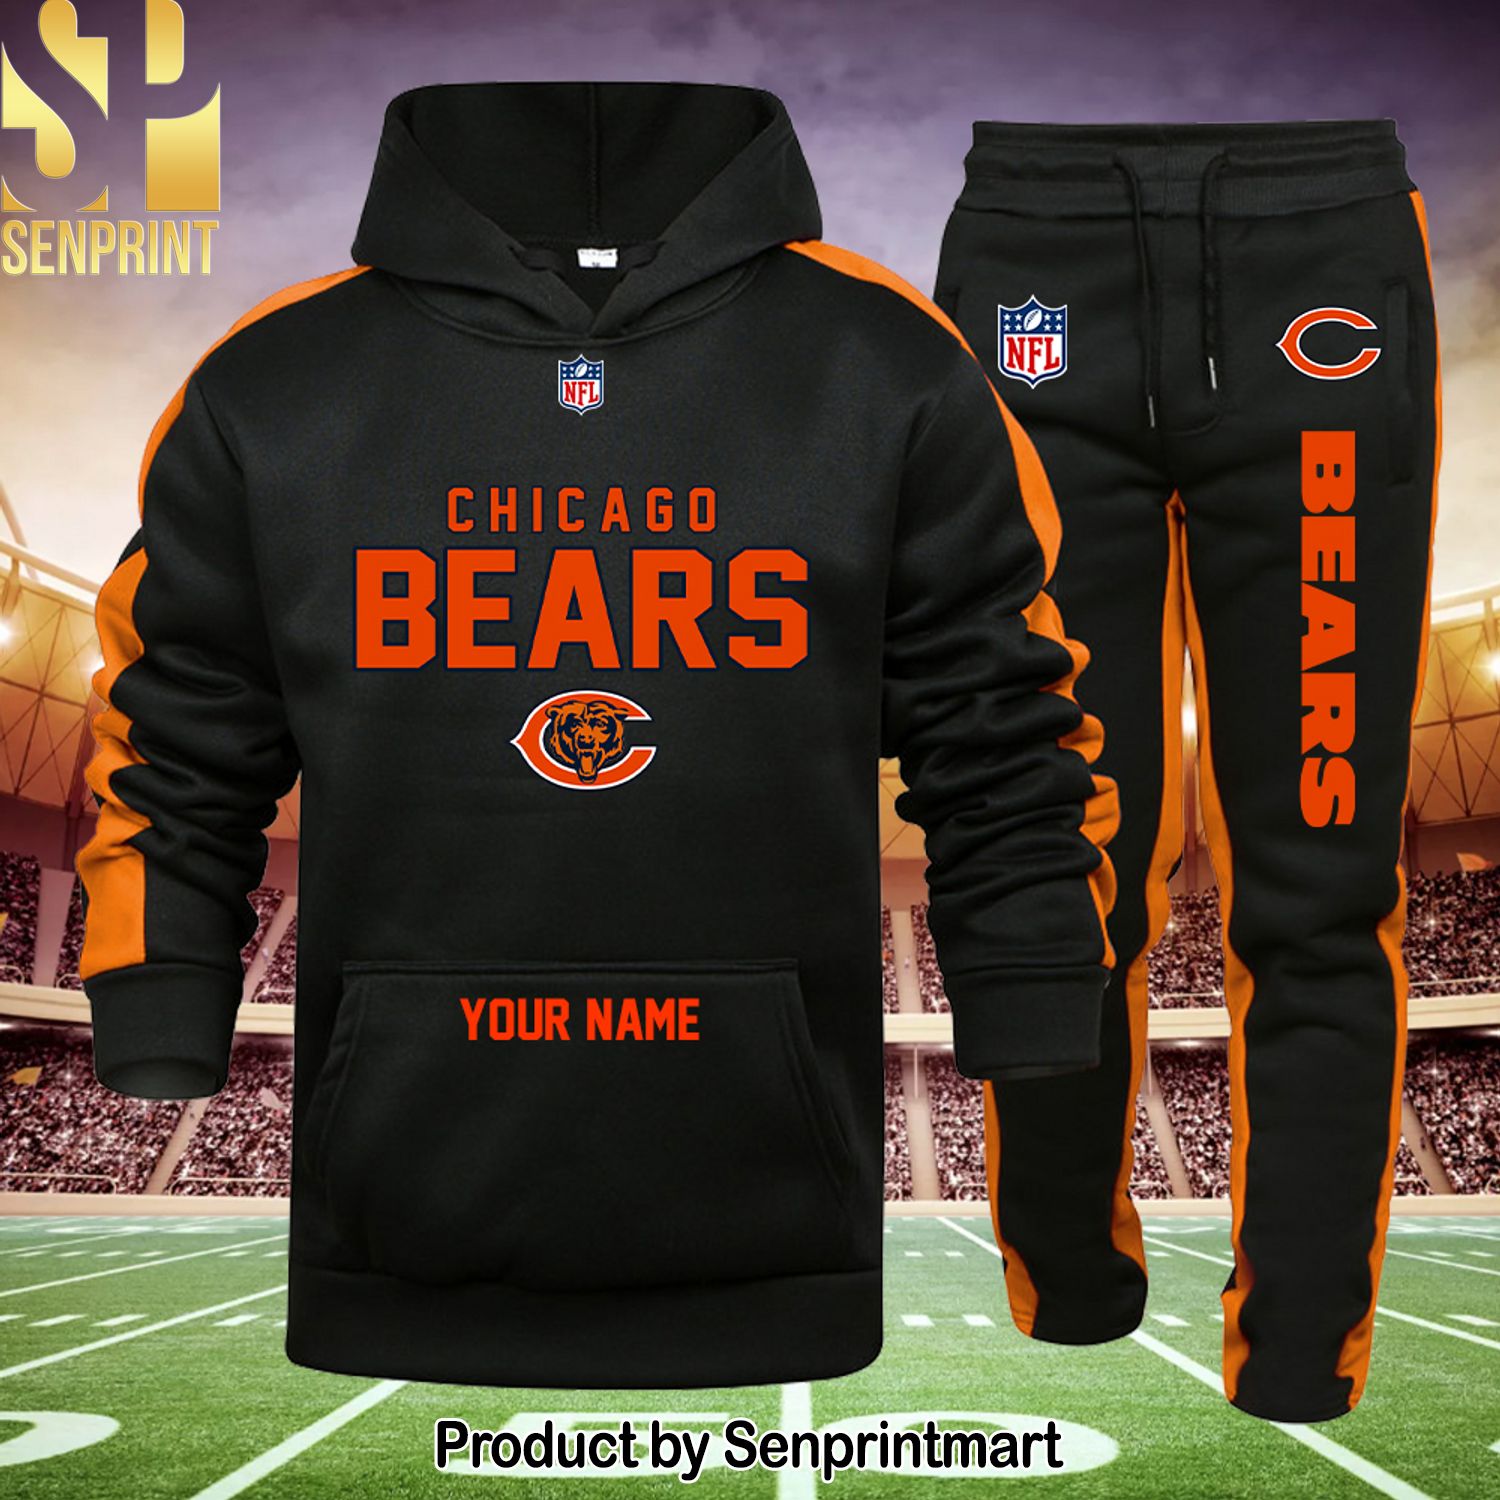 NFL Chicago Bears New Fashion Full Printed Shirt and Sweatpants